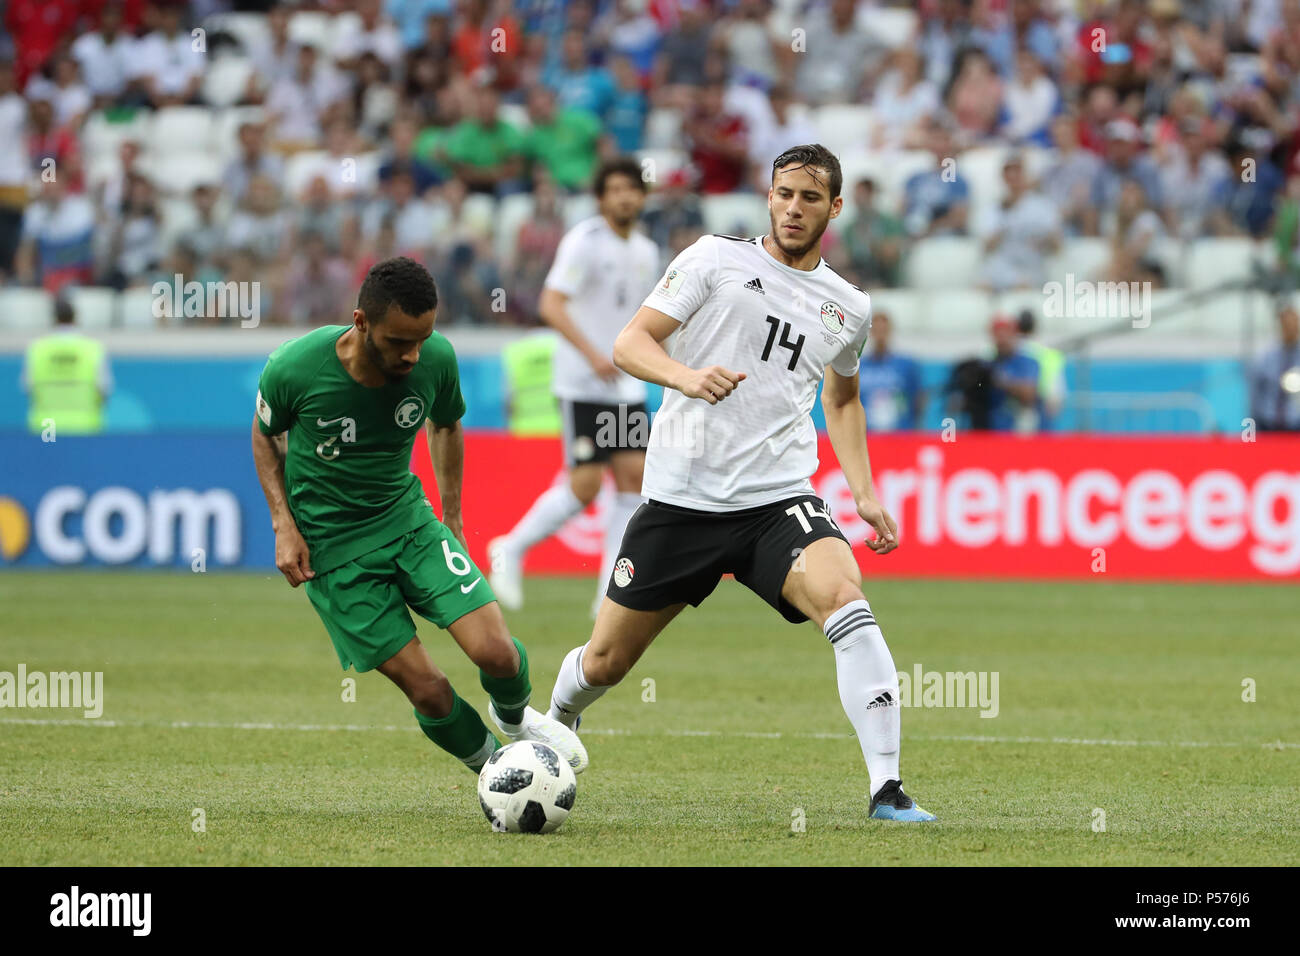 Volgograd, Russia. 25th June, 2018. Egypt's Ramadan Sobhi (R) battles for the ball with Saudi Arabia's Mohammed Al-Breik during the FIFA World Cup 2018 Group A soccer match between Saudi Arabia and Egypt at the Volgograd Arena in Volgograd, Russia, 25 June 2018. Credit: Ahmed Ramadan/dpa/Alamy Live News Stock Photo